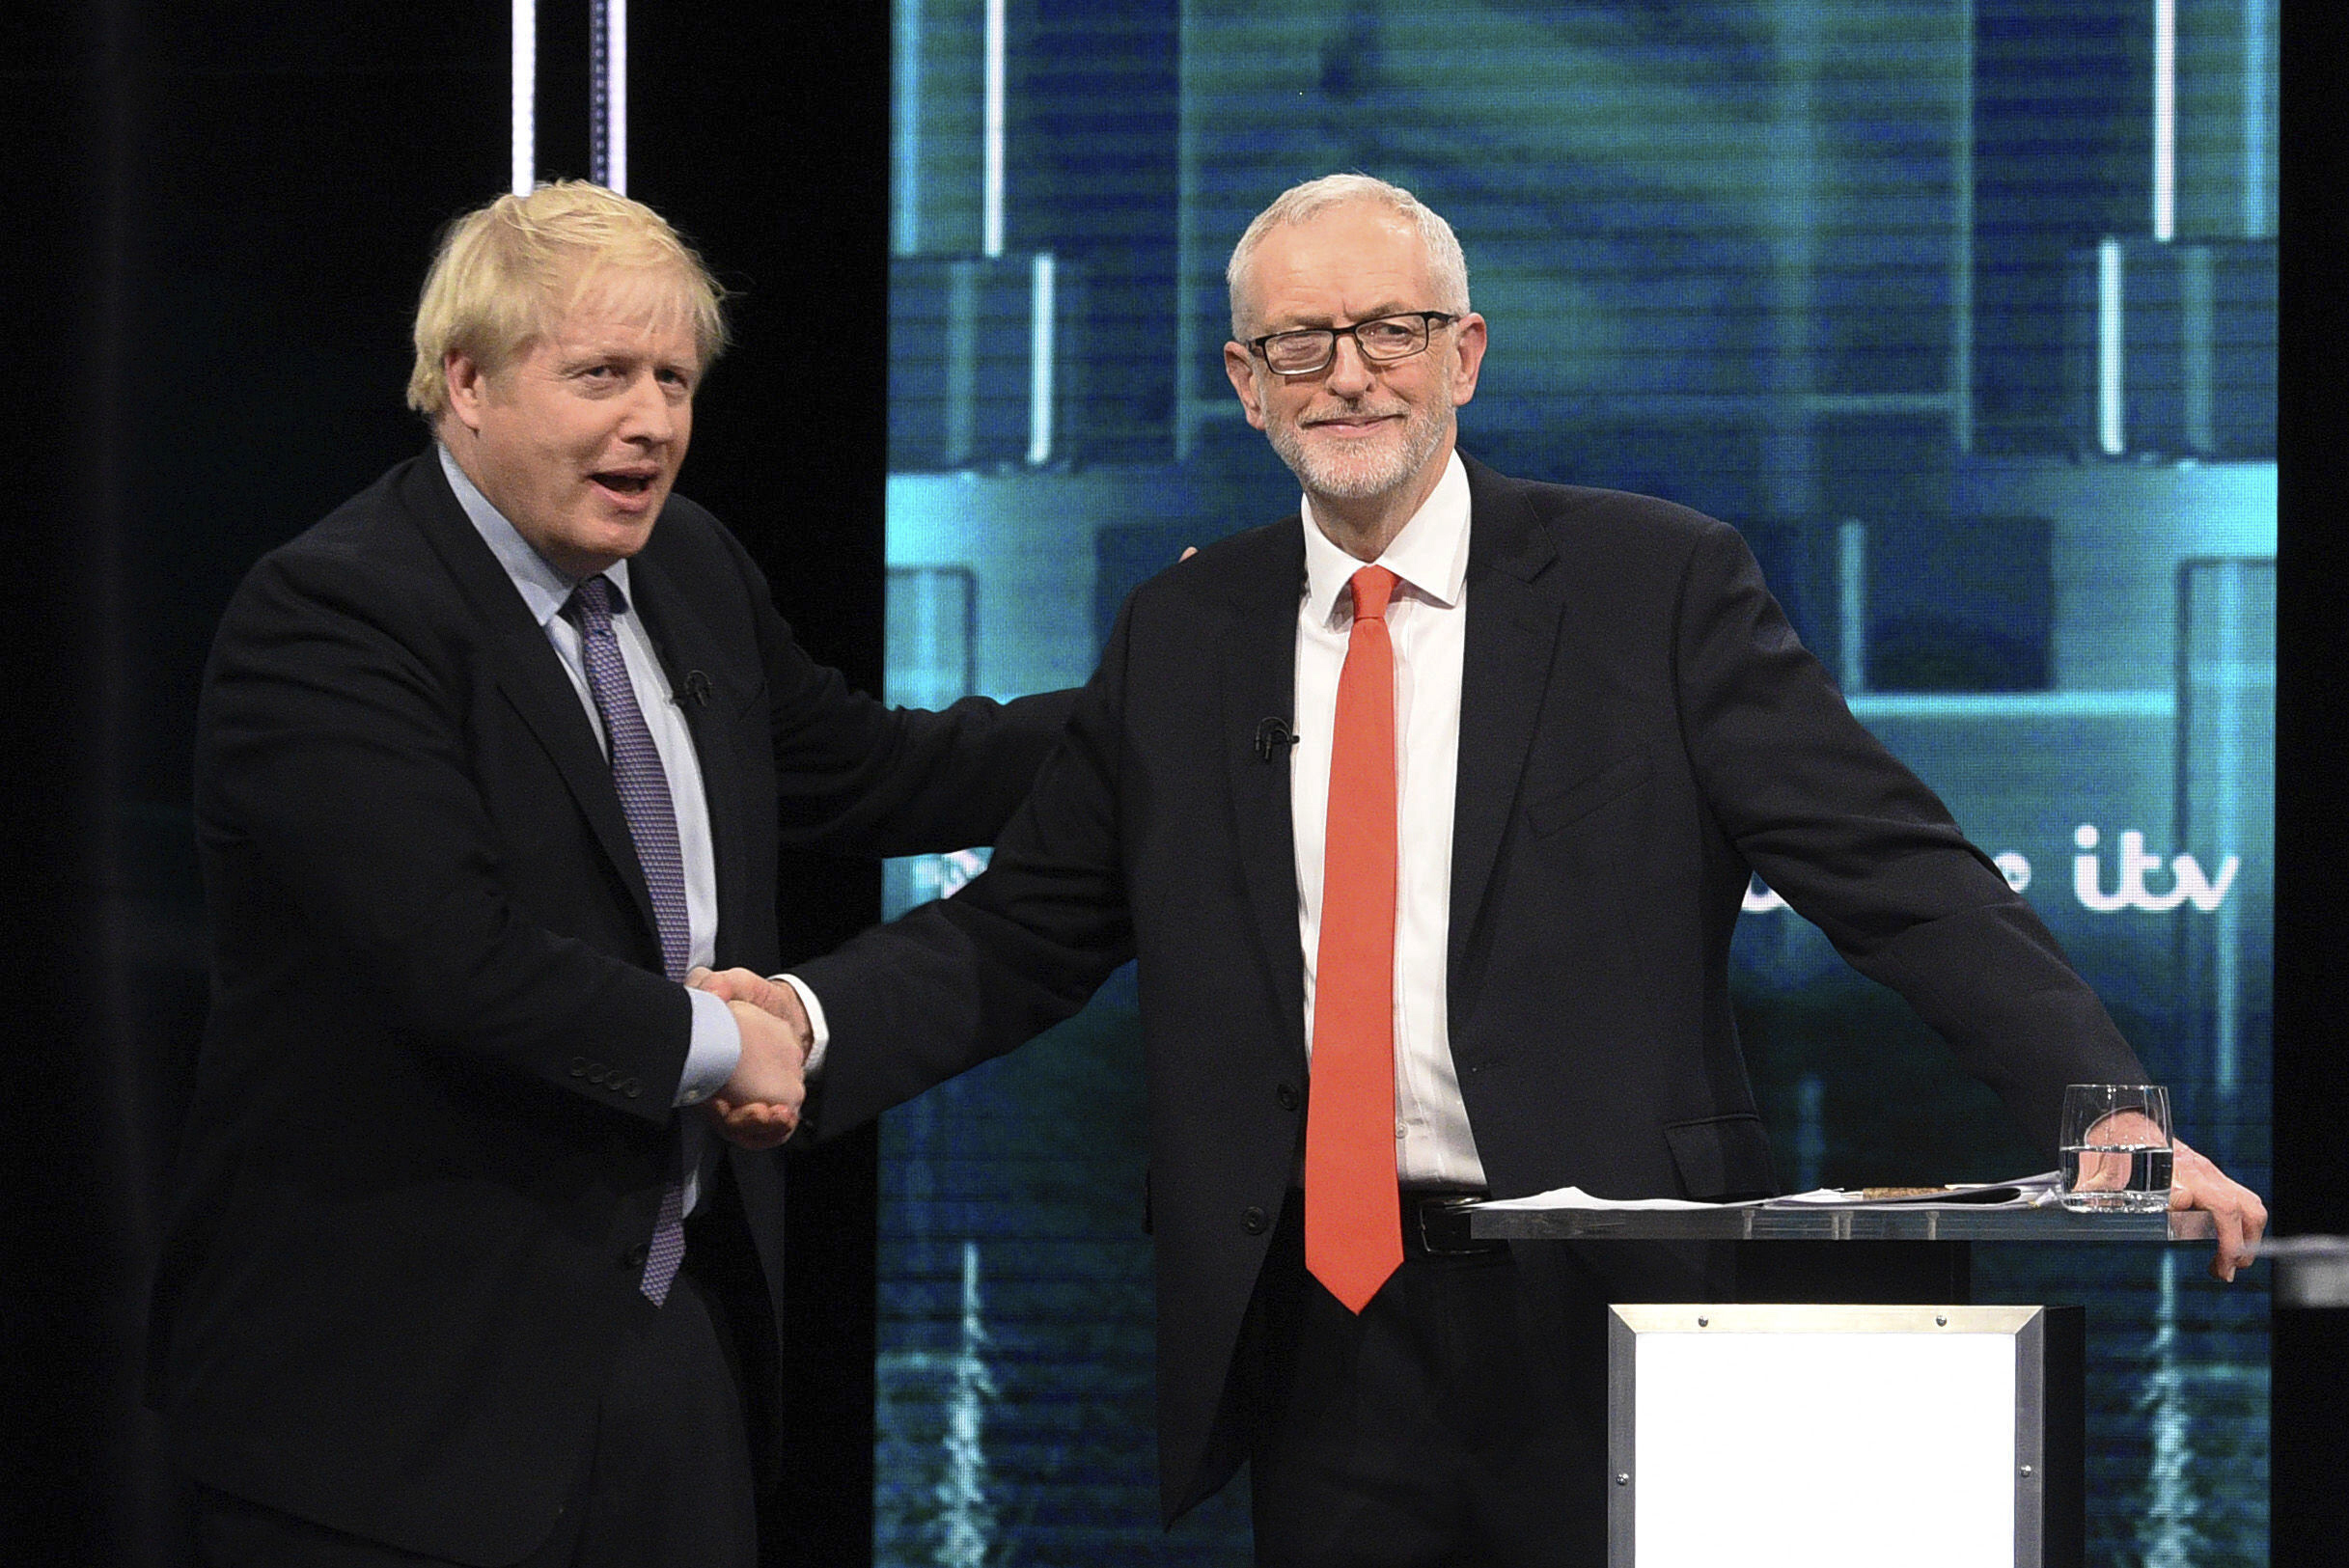 Boris Johnson and Jeremy Corbyn shake hands during their election head-to-head debate live on TV in Manchester on Tuesday.